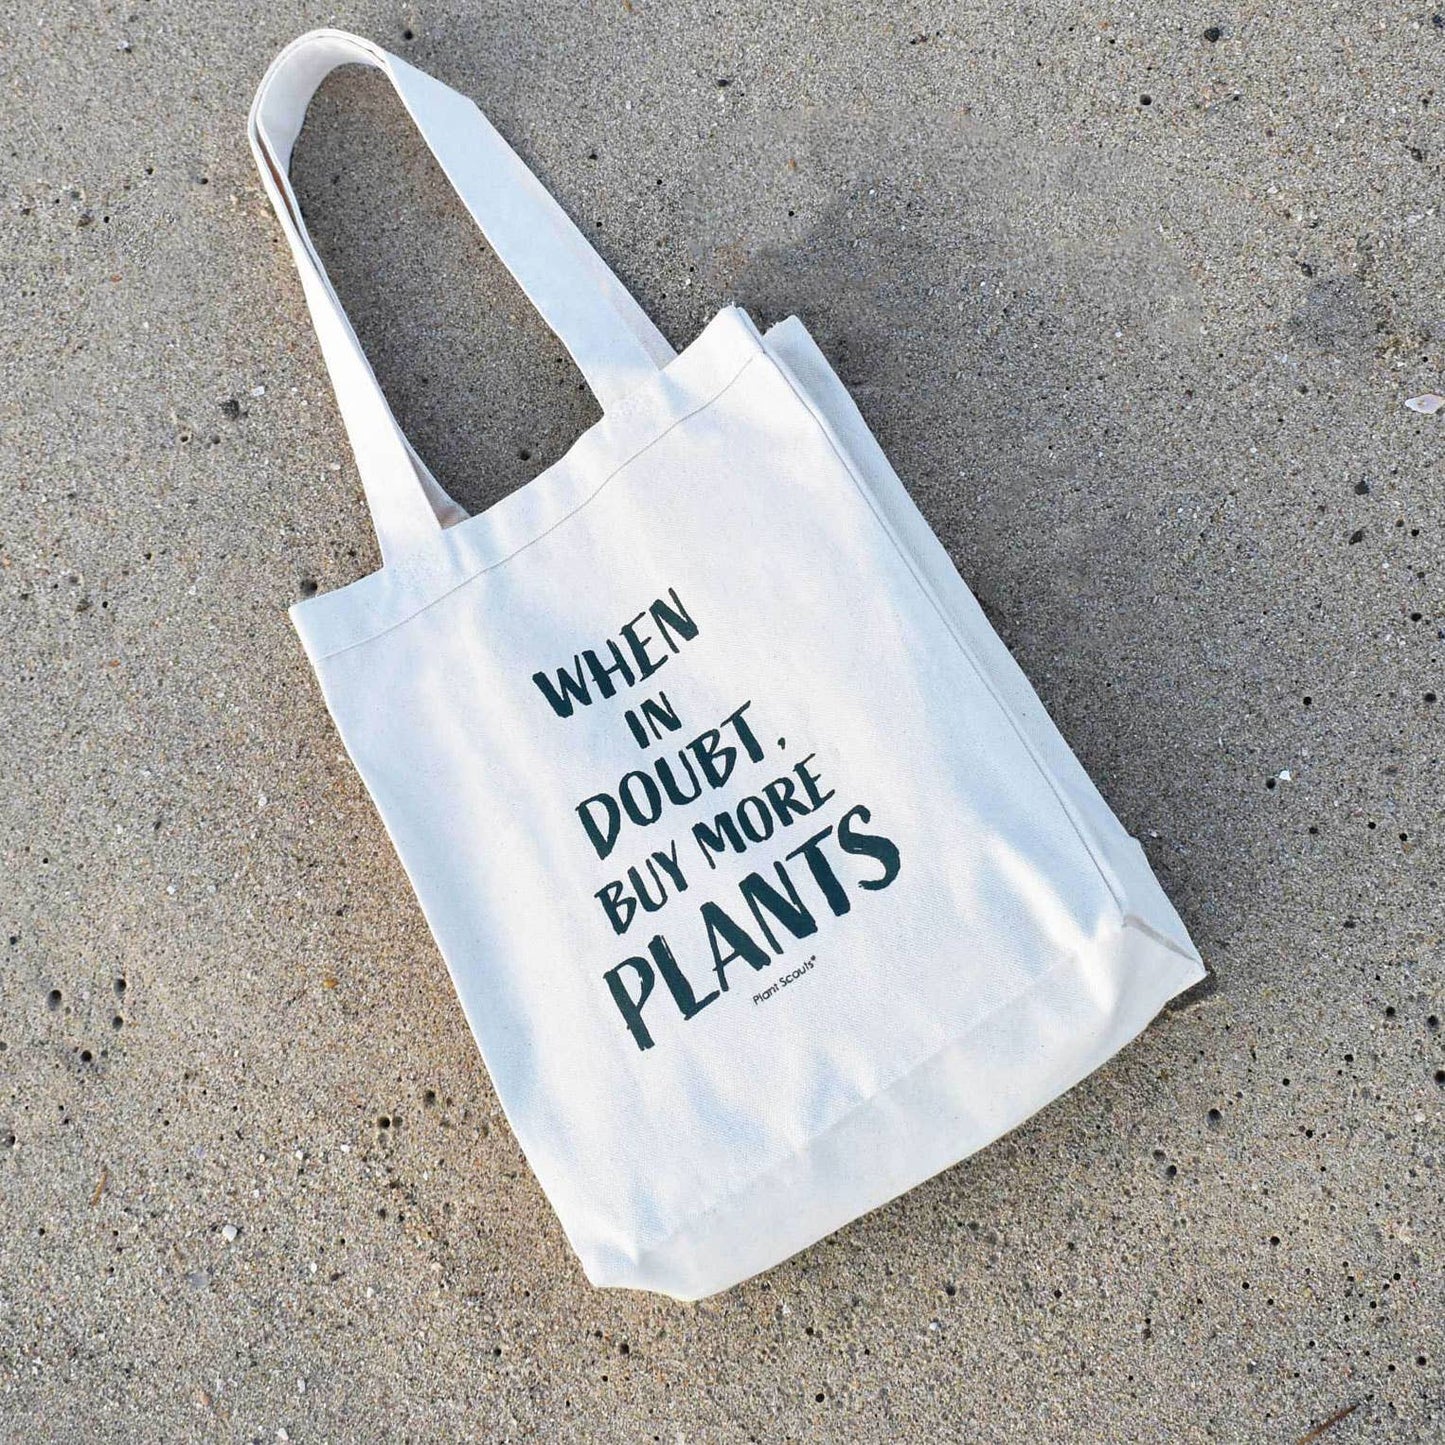 Plant Scouts - Buy More Plants Tote Bag